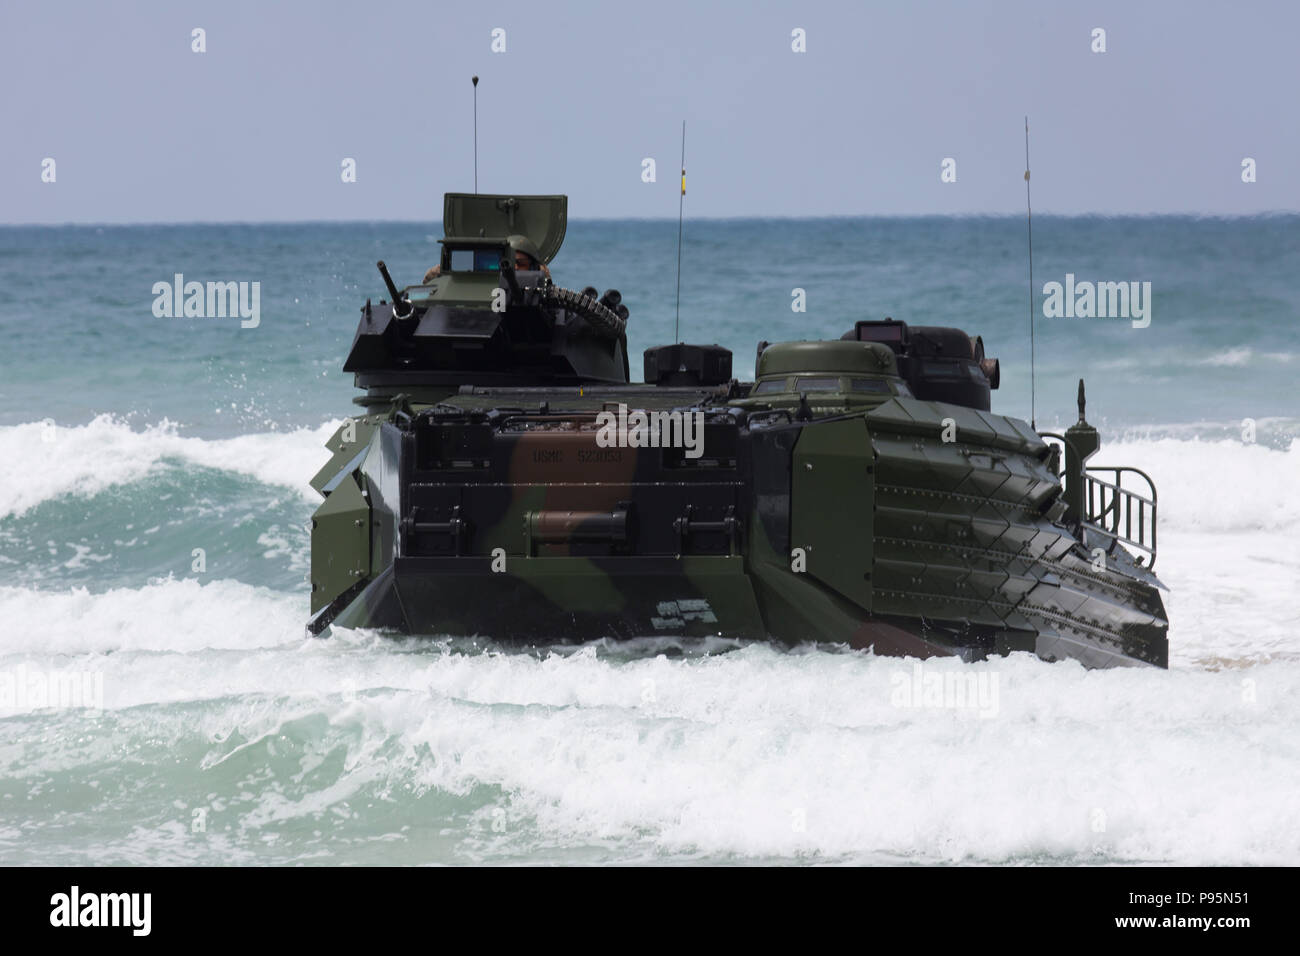 180713-M-PG096-1035 MARINE CORPS BASE CAMP PENDLETON, Calif. (July 13, 2018) A U.S. Marine Corps AAV-P7/A1 assault amphibious vehicle approaches the shore during an amphibious raid as part of Rim of the Pacific (RIMPAC) exercise on Marine Corps Base Camp Pendleton, California, July 13, 2018. This evolution provided an opportunity for participating nations to share best practices which included loading and unloading drills as well as squad attacks. RIMPAC demonstrates the value of amphibious forces and provides high-value training for task-organized, highly capable Marine Air-Ground Task Forces Stock Photo